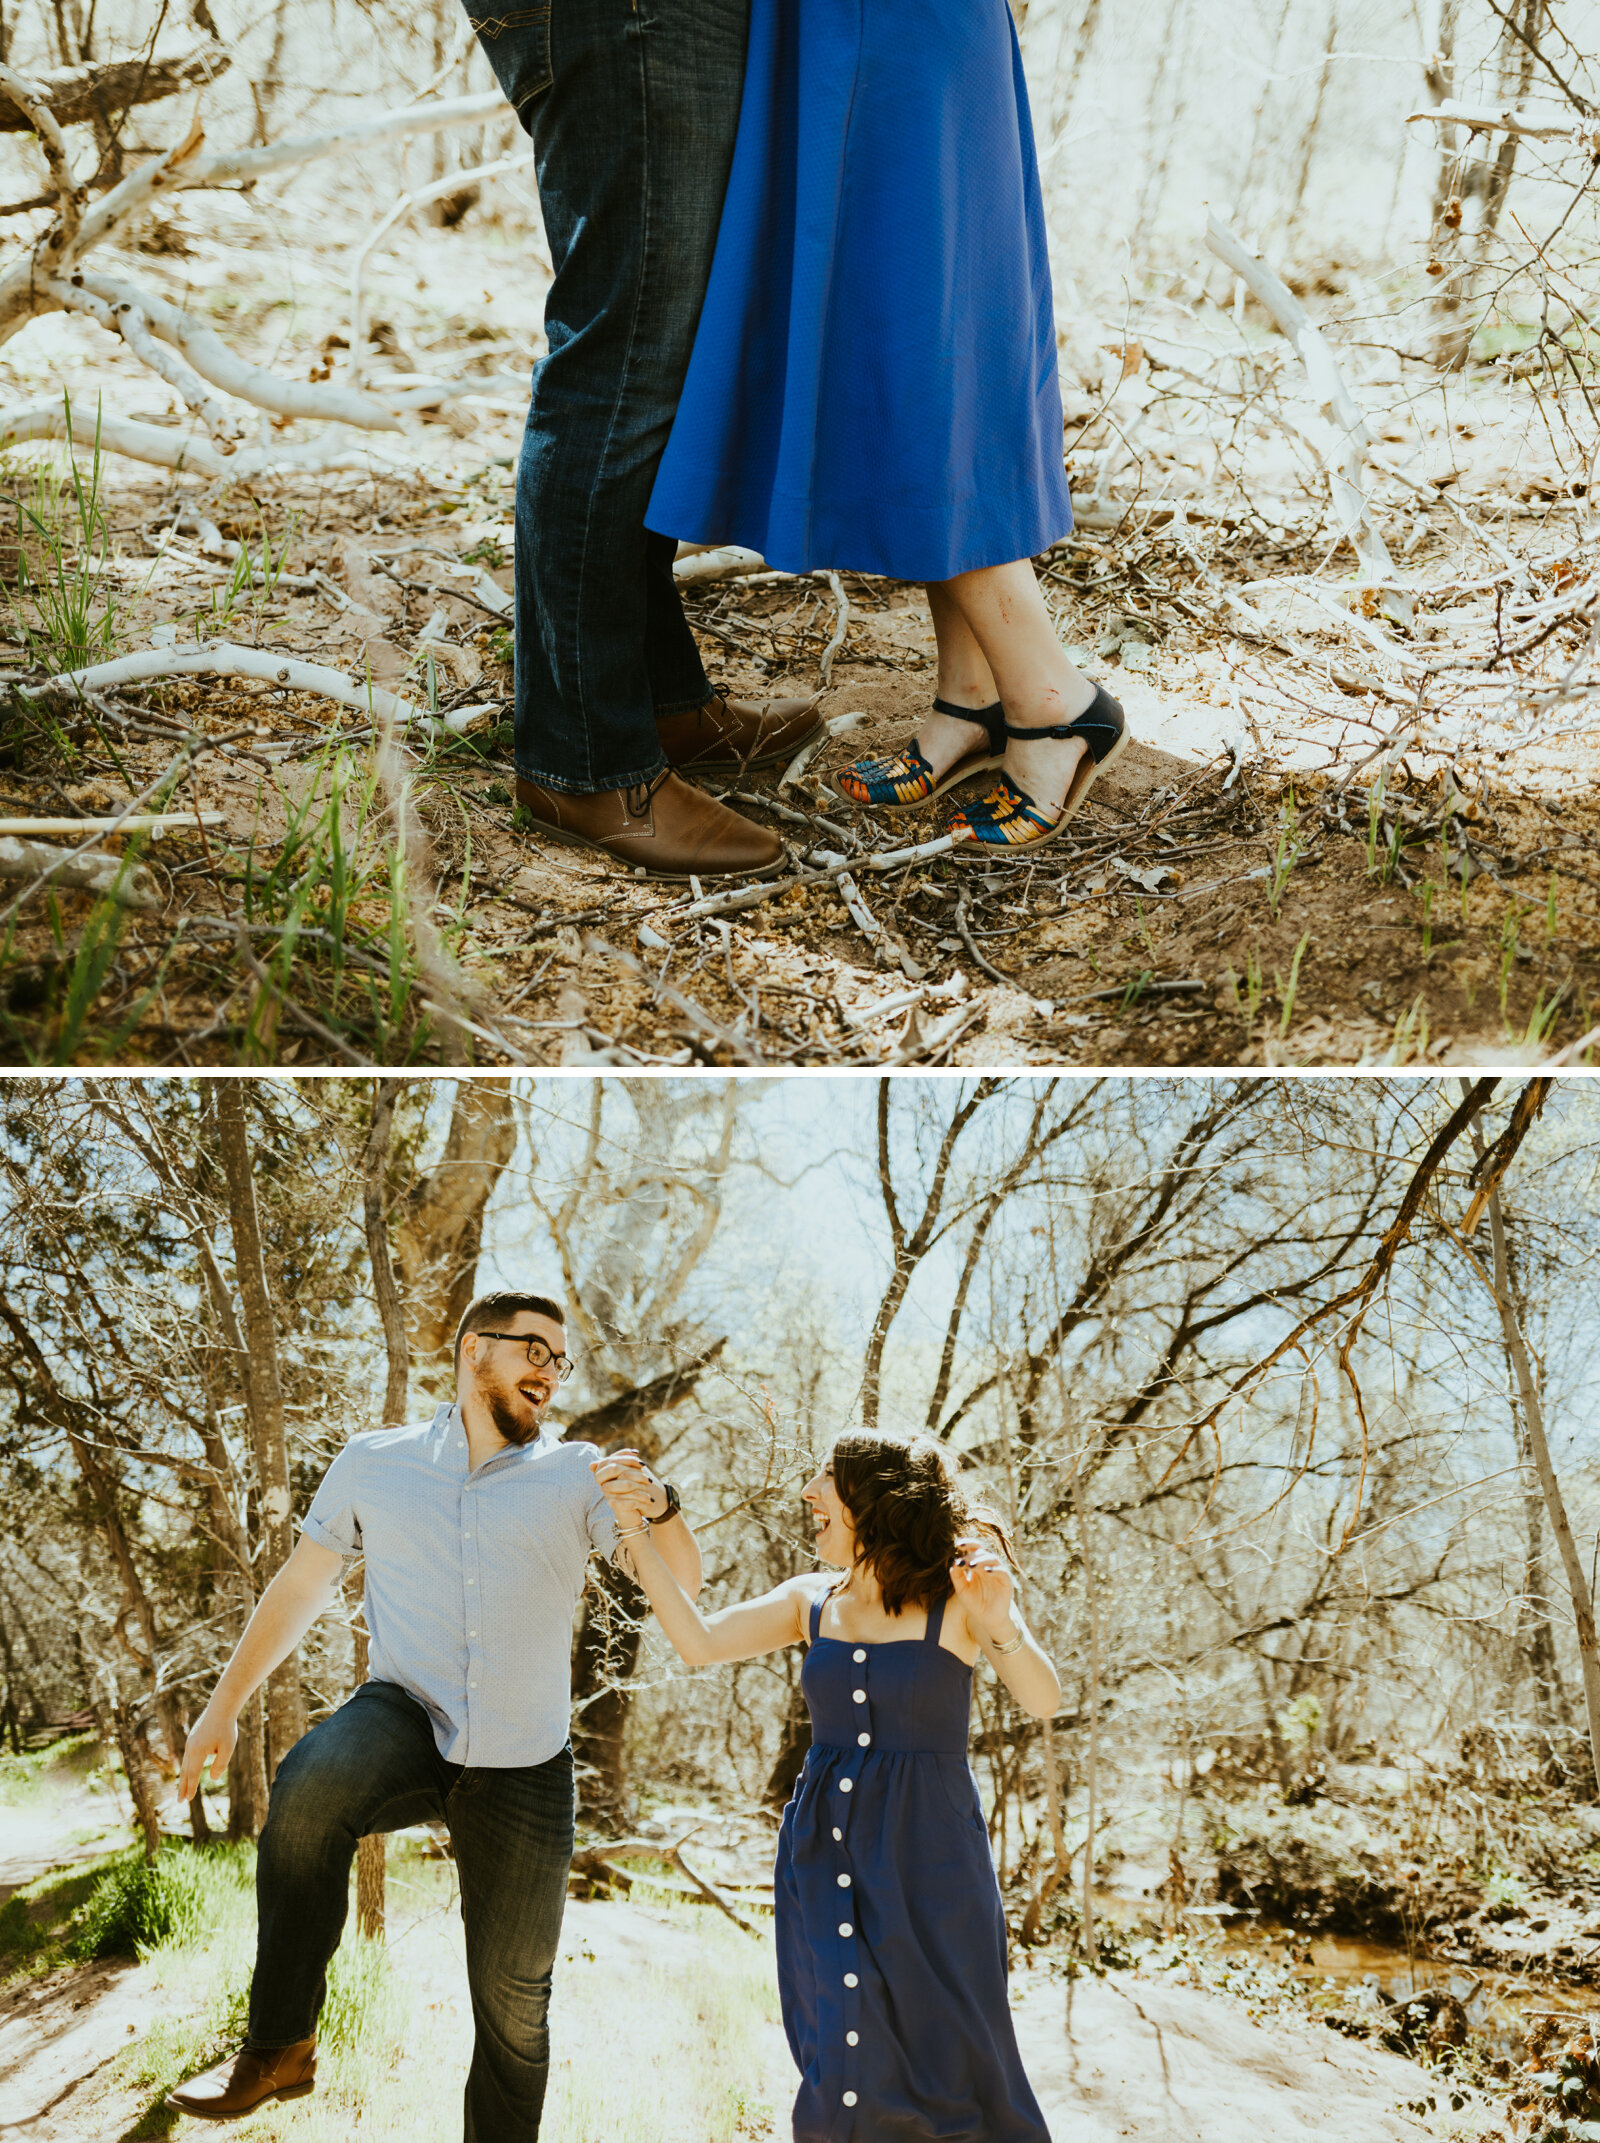 red rock crossing sedona arizona cathedral rock crescent moon ranch couple photos engagement photo outfit inspiration couple posing ideas midday picture.jpg